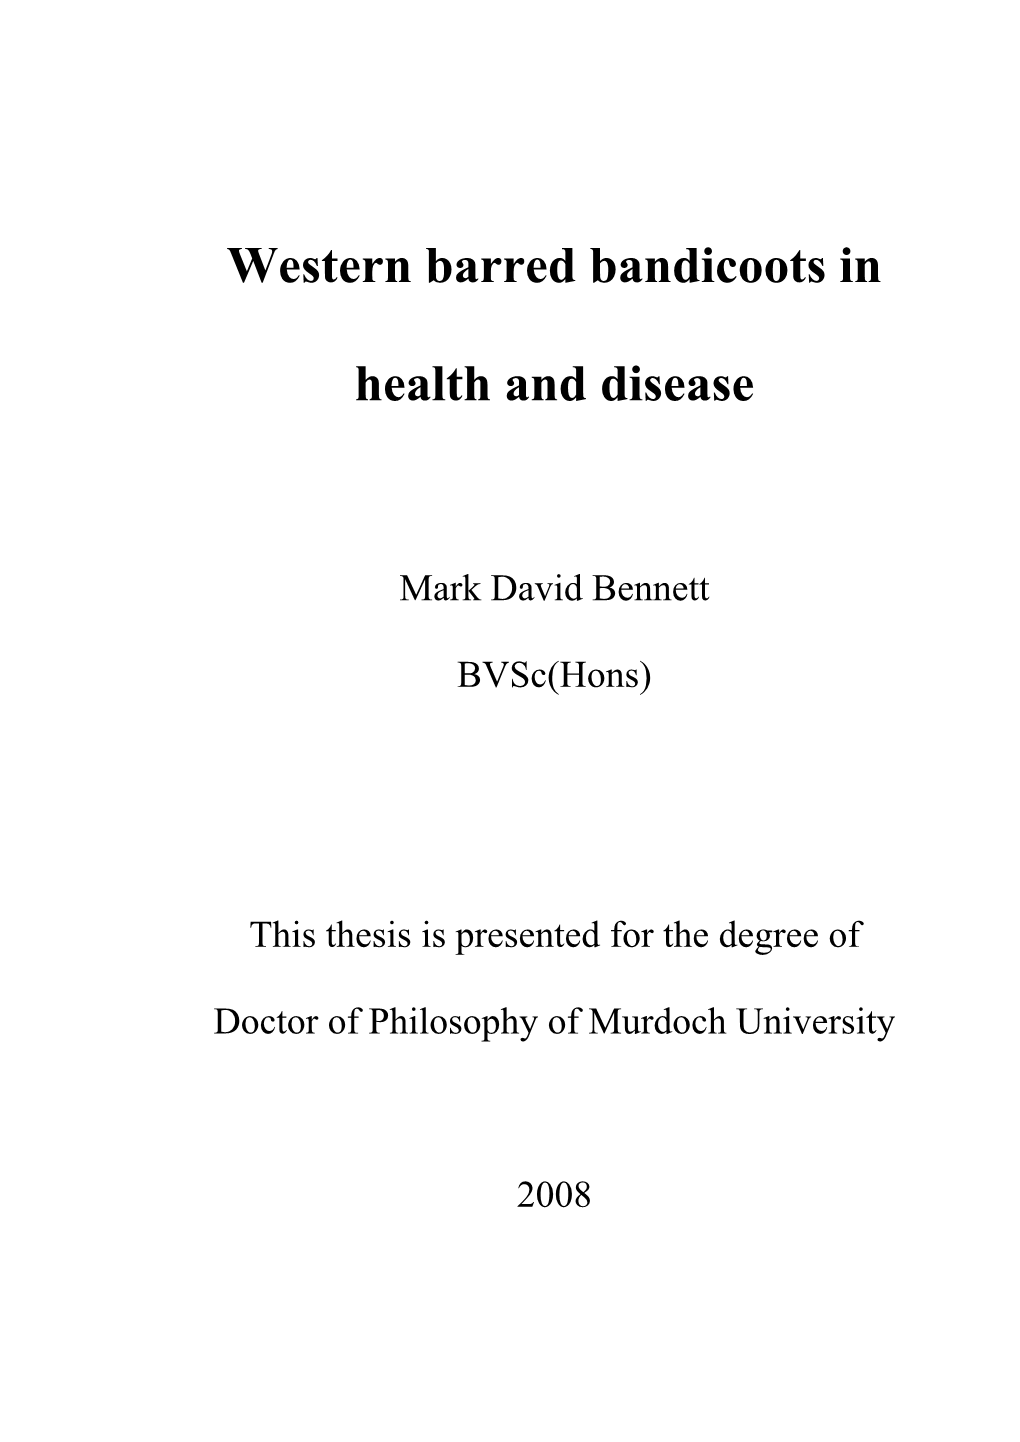 Western Barred Bandicoots in Health and Disease